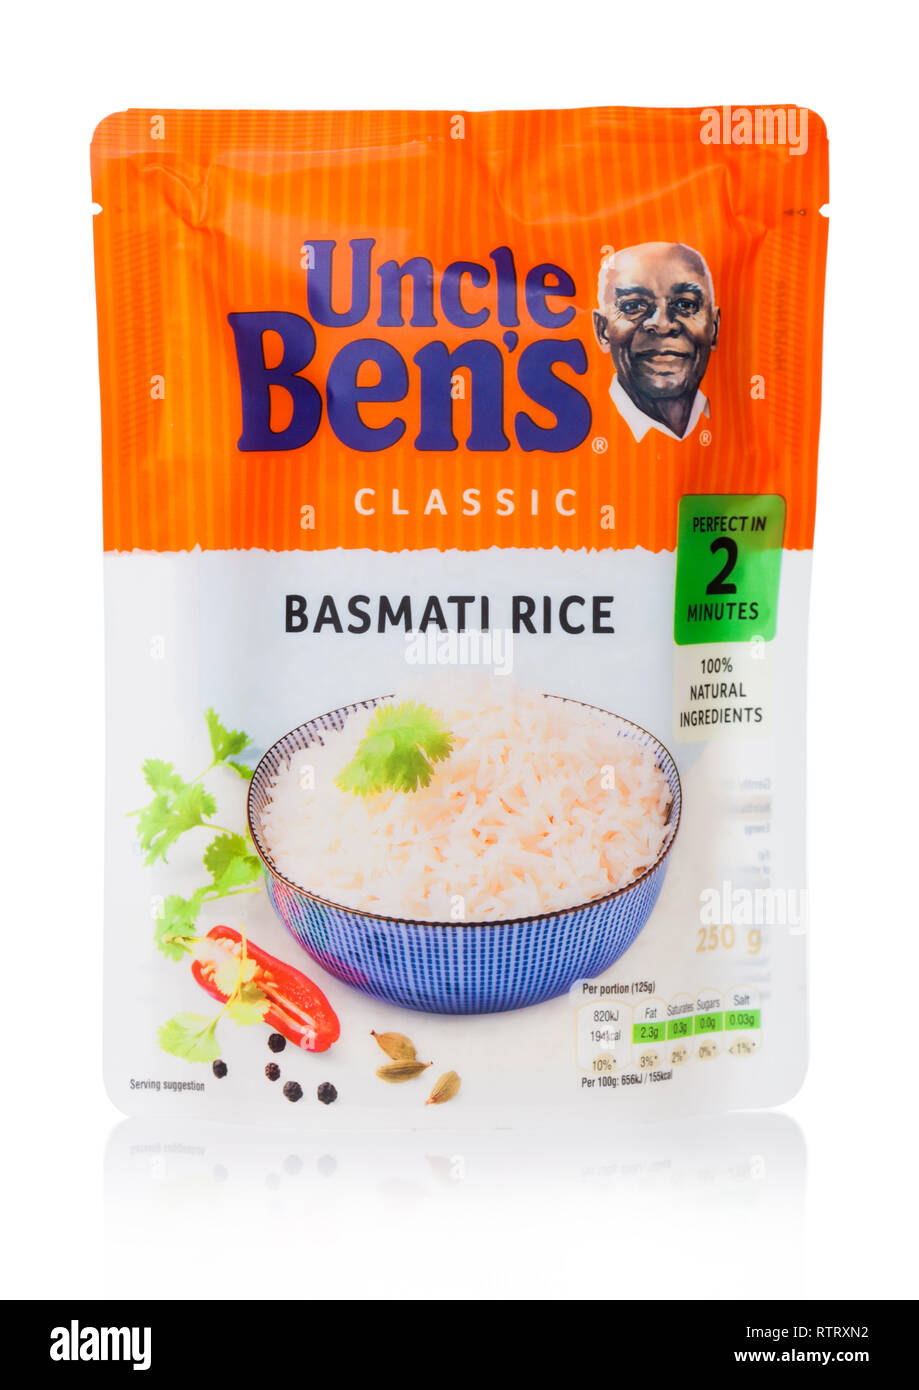 https://c8.alamy.com/comp/RTRXN2/london-uk-march-01-2019-uncle-bens-microwave-classic-basmati-rice-packet-on-white-RTRXN2.jpg